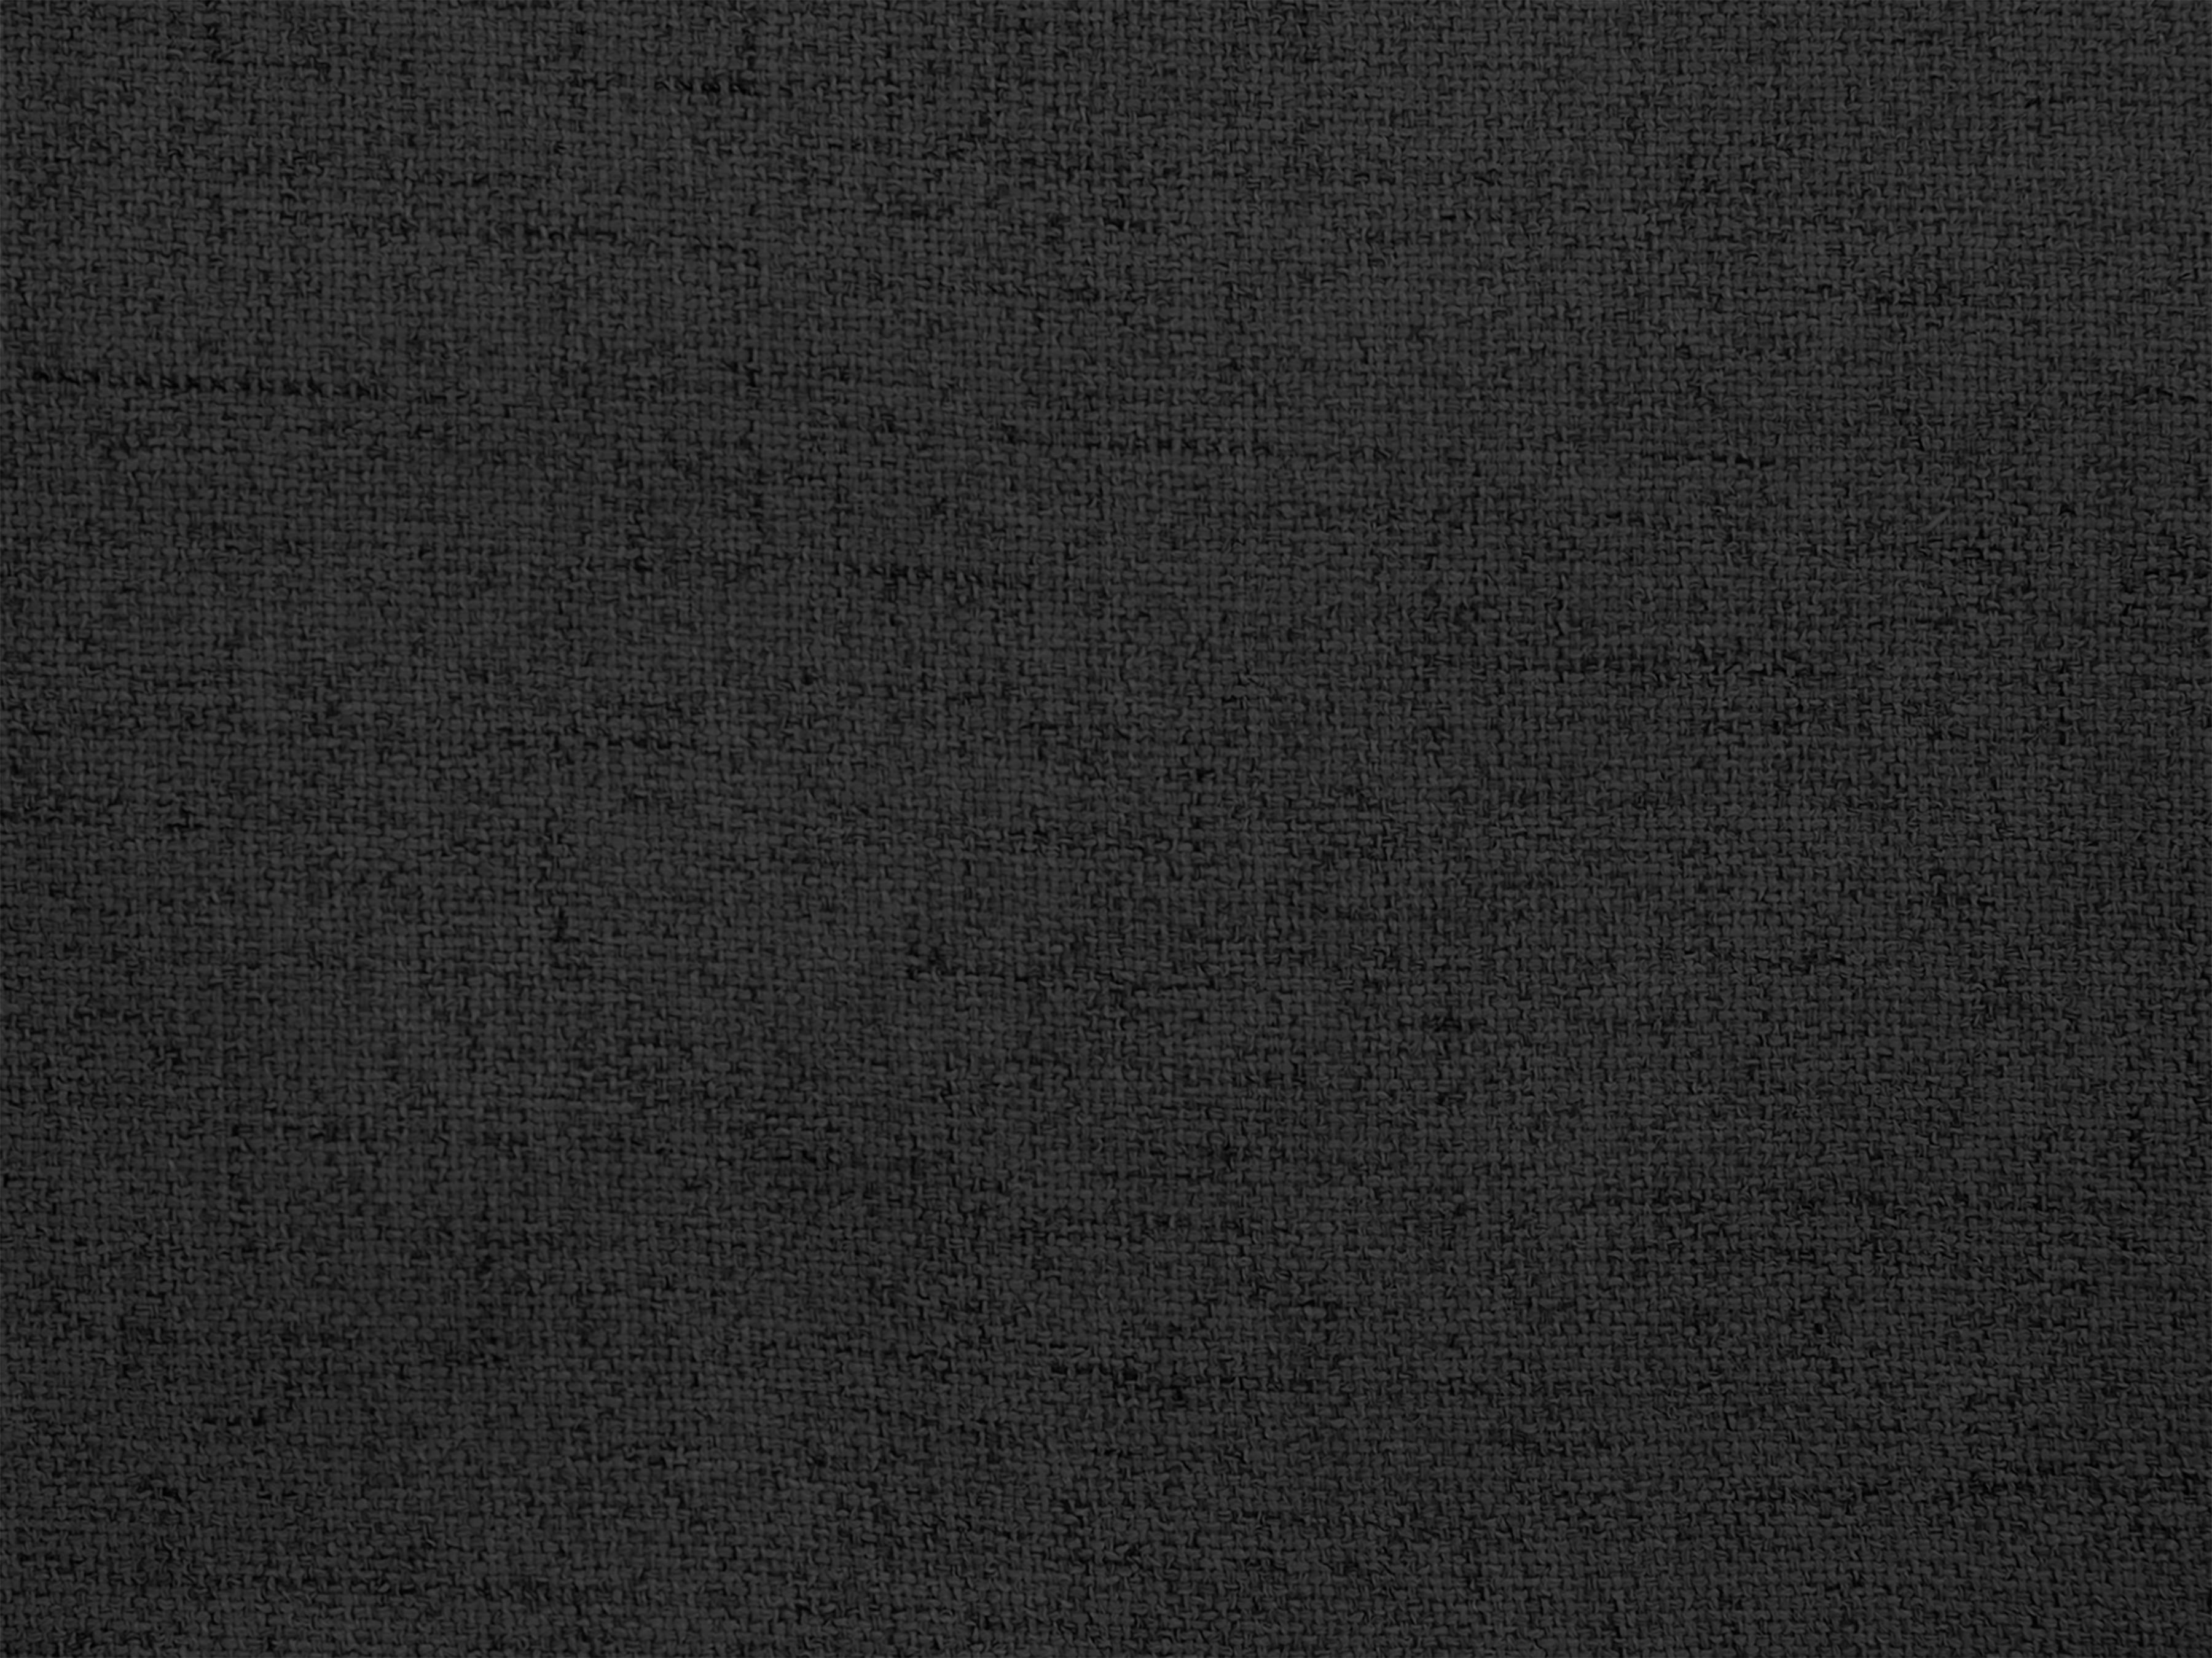 Charcoal Waxed Canvas Fabric Swatch - EvenOdd